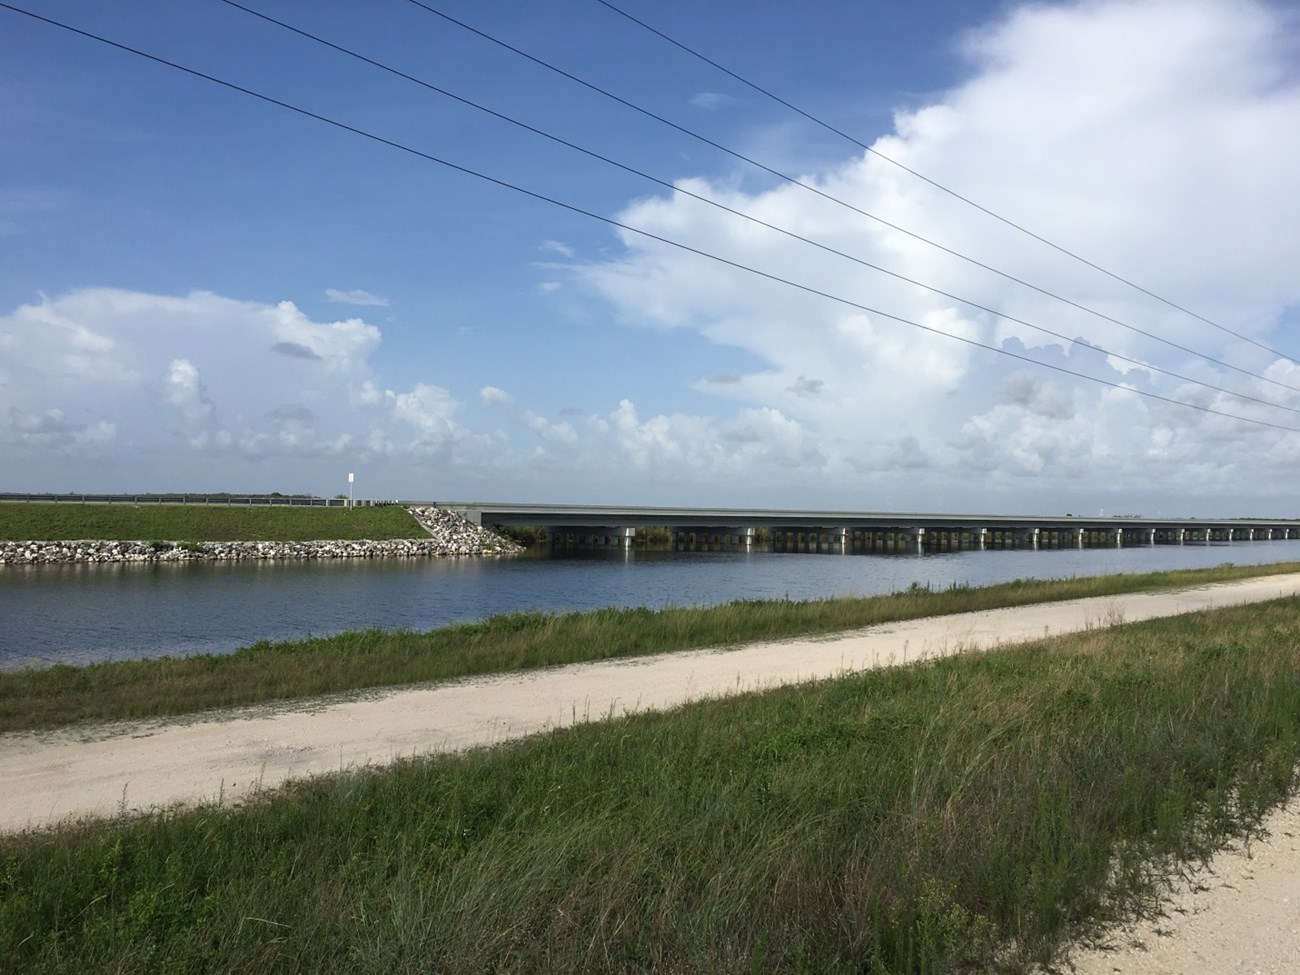 Tamiami 1 mile section completed, 2014, connecting the canal flow to Everglades National Park